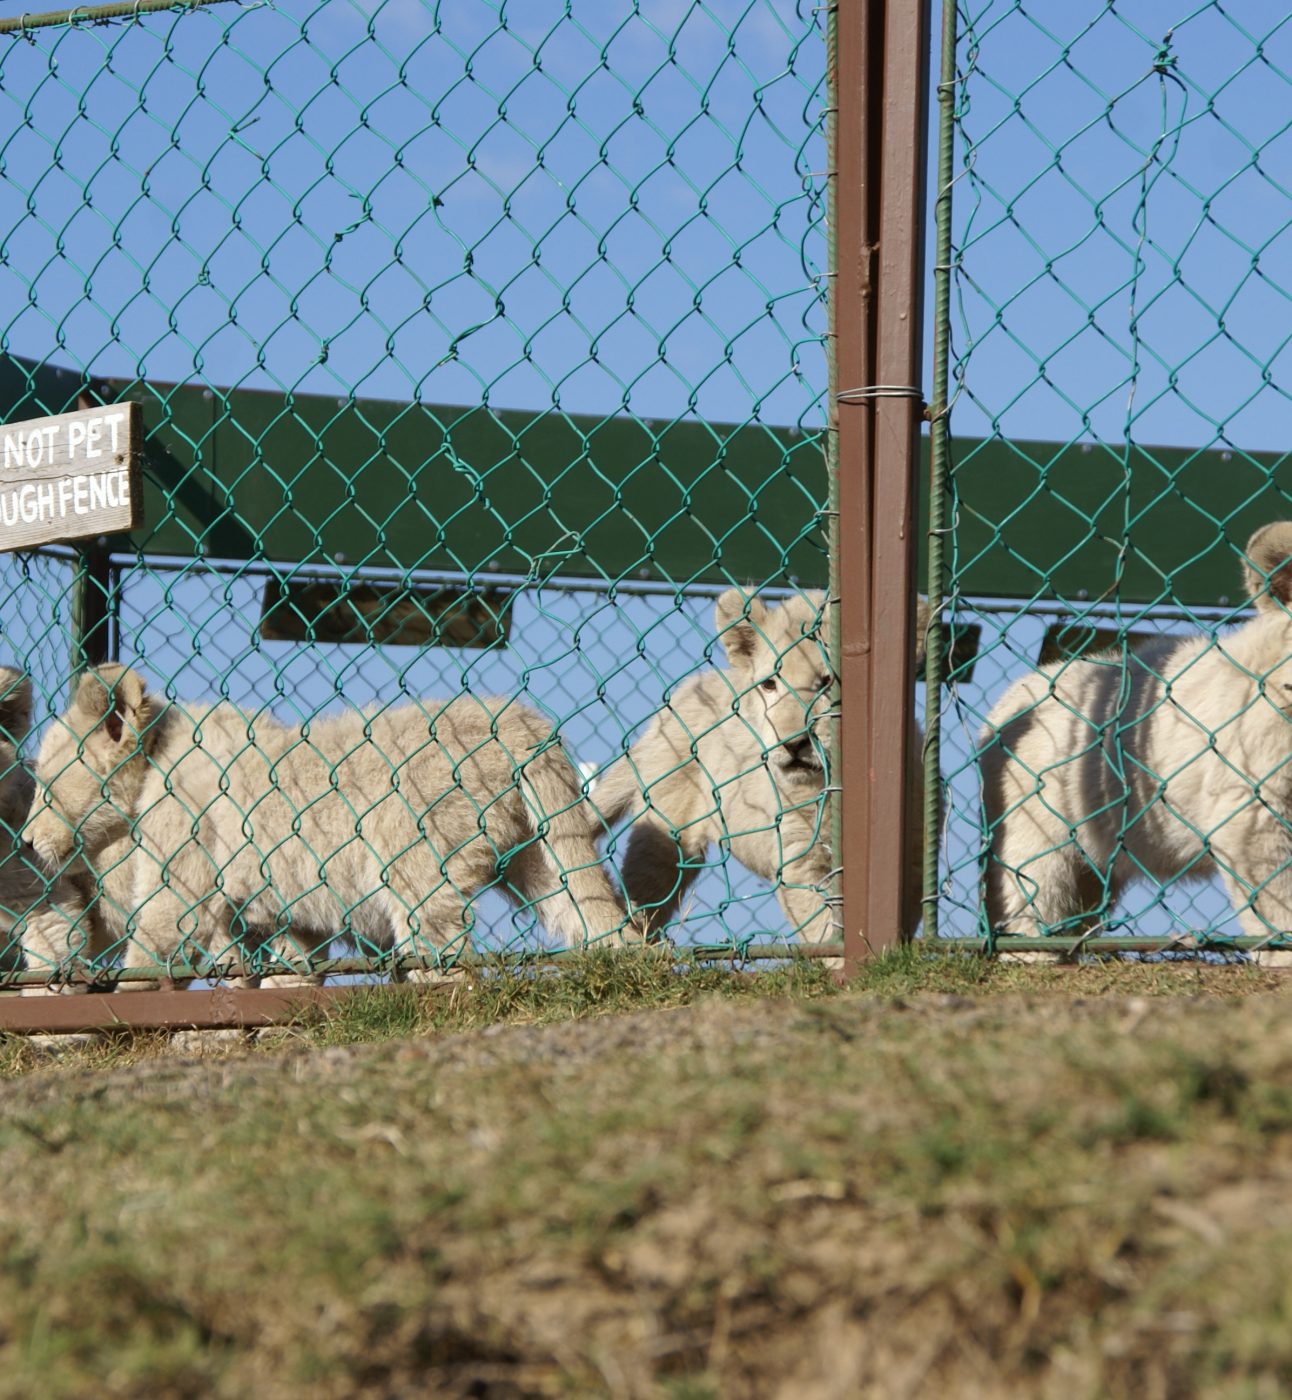 Five little lion cubs standing in a pen behind fencing